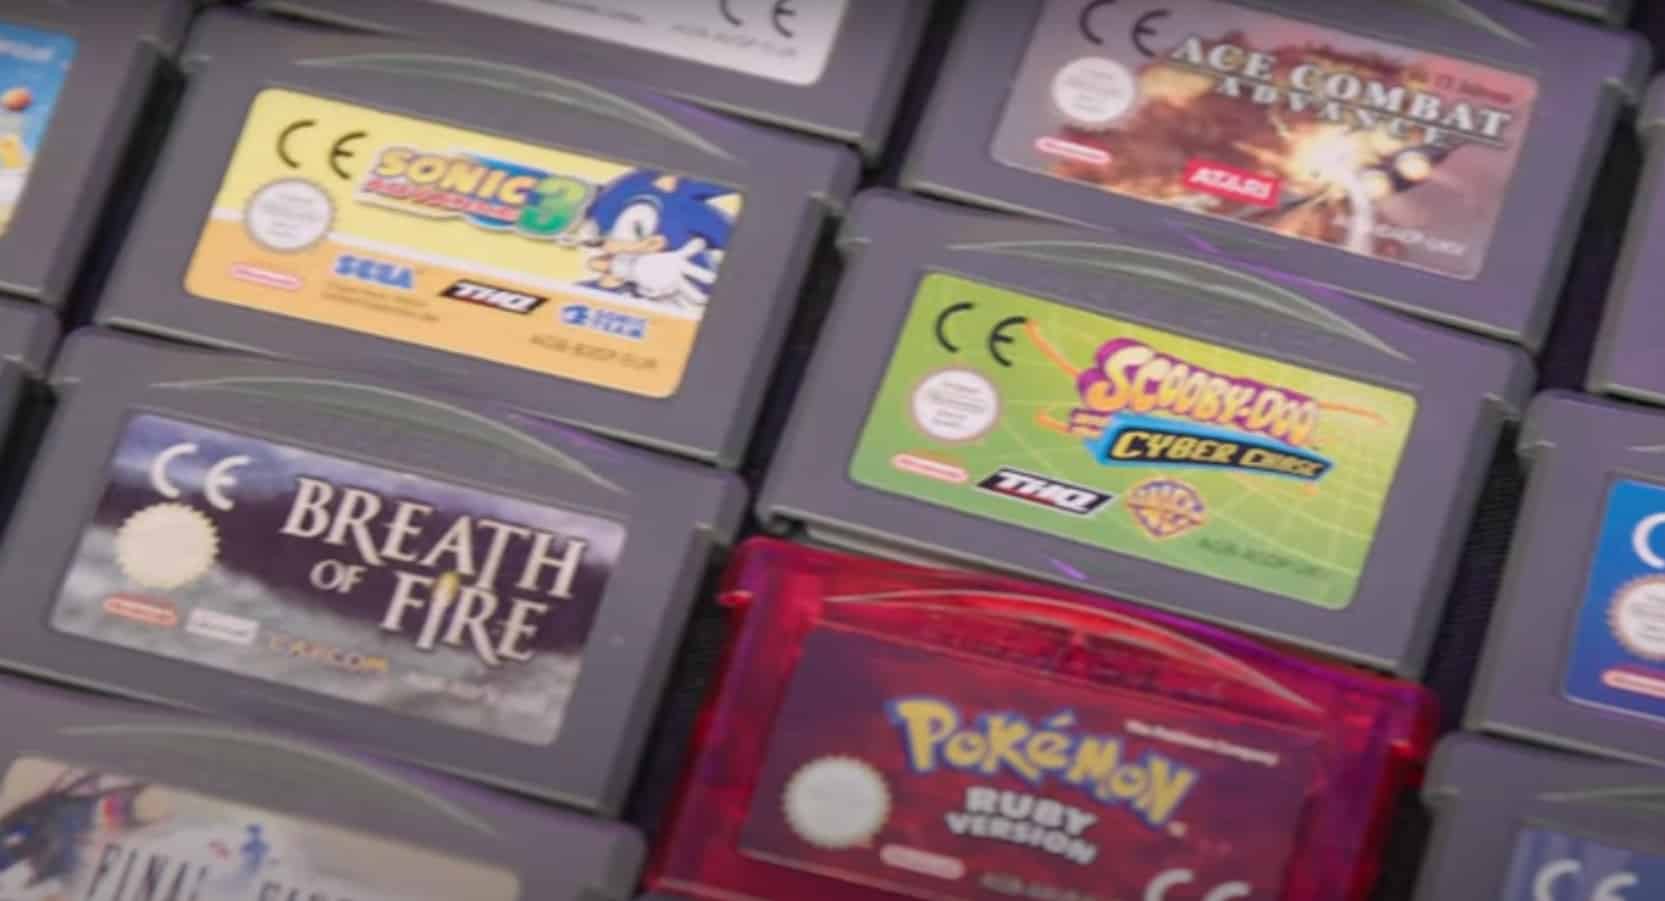 Sonic the Hedgehog and Pokemon Ruby are amongst many of the games and favourites that we've collected and played over the years